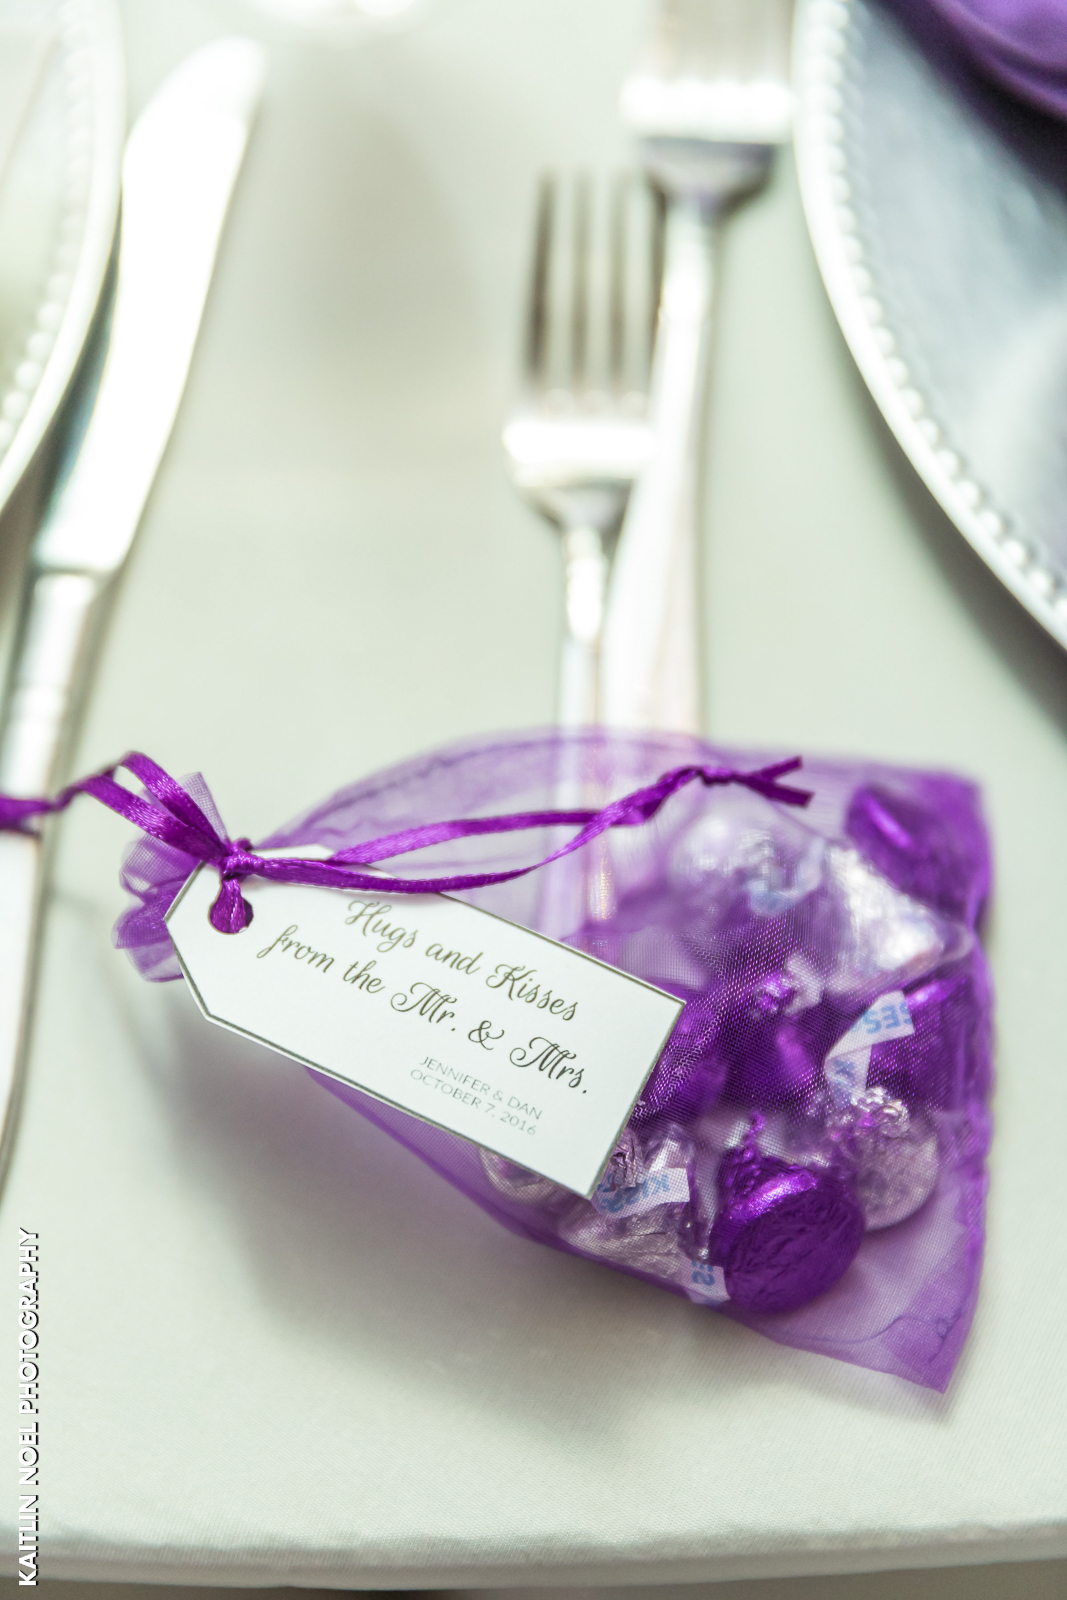 Wedding Favors Your Guests Will Enjoy Sterling Ballroom Eatontown Nj